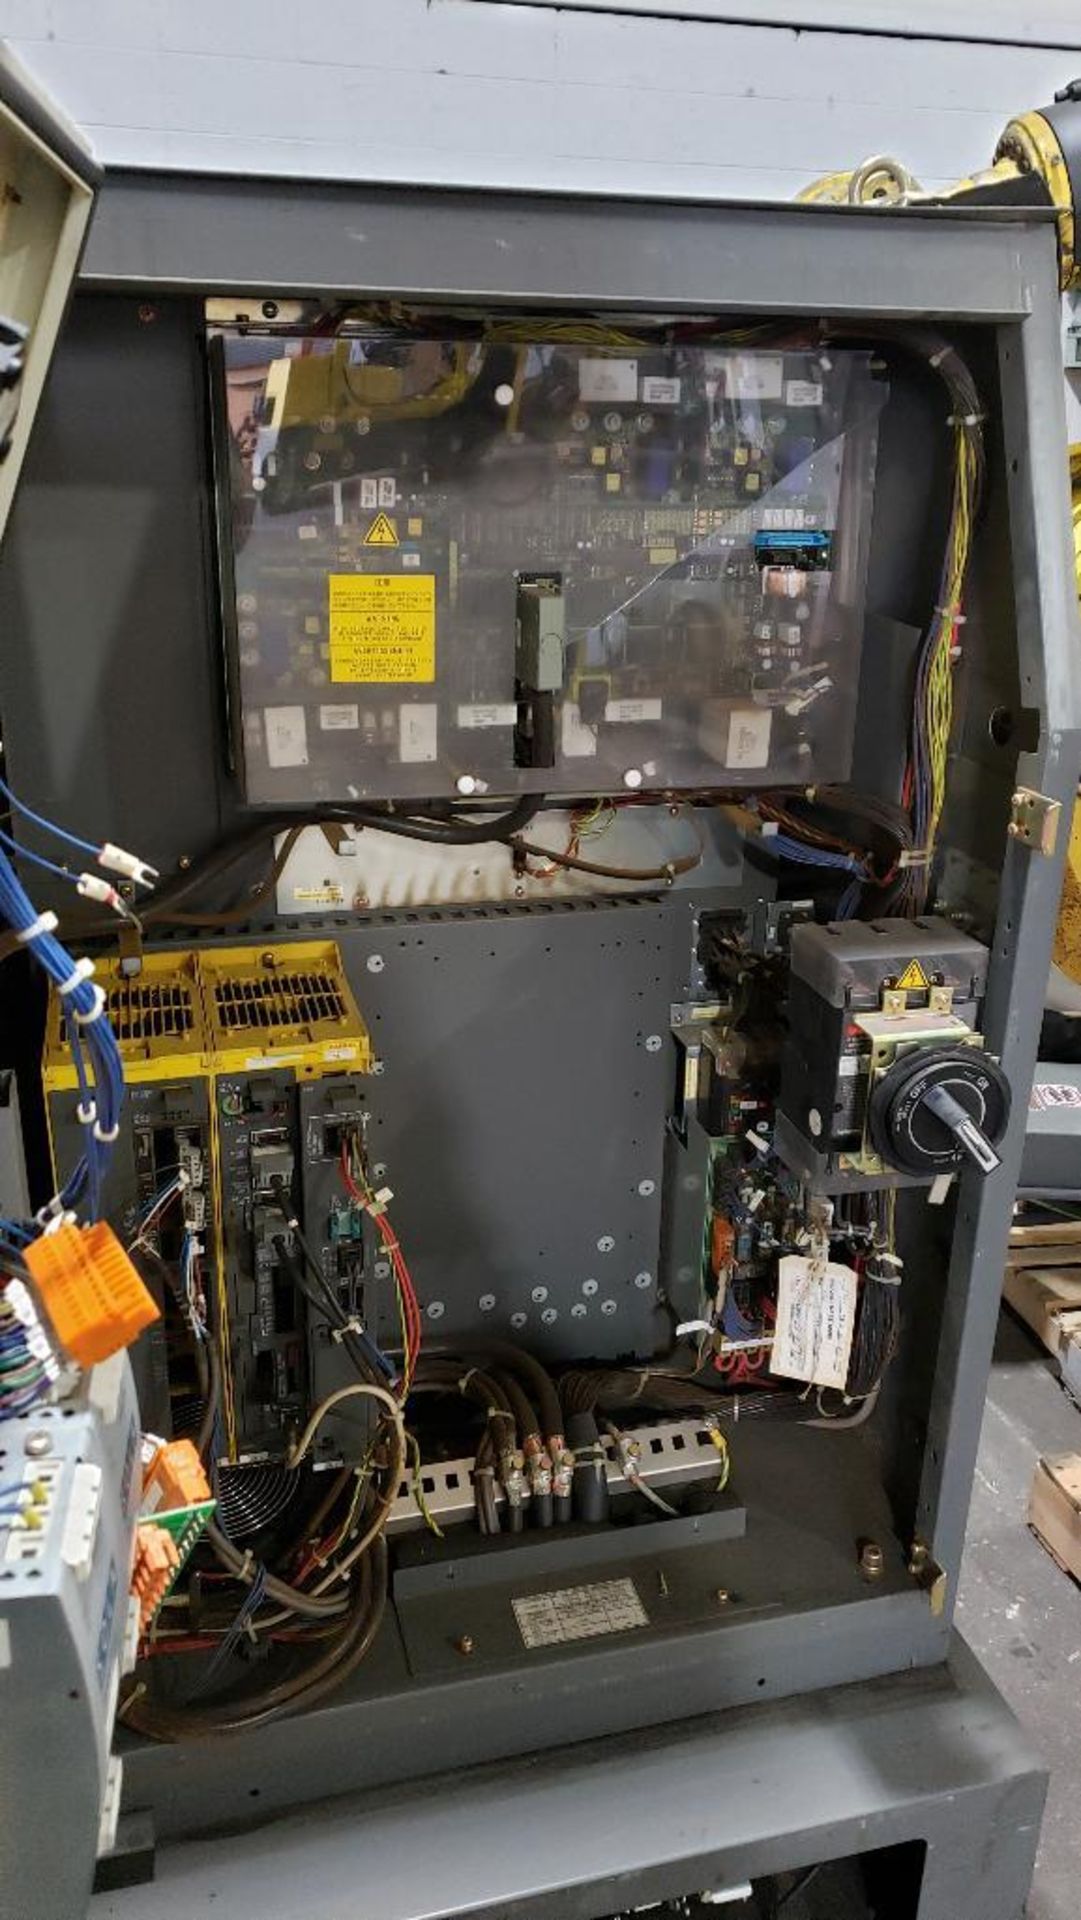 Fanuc R-2000iA/200F robot with Fanuc System R-J3iB controller. - Image 12 of 16